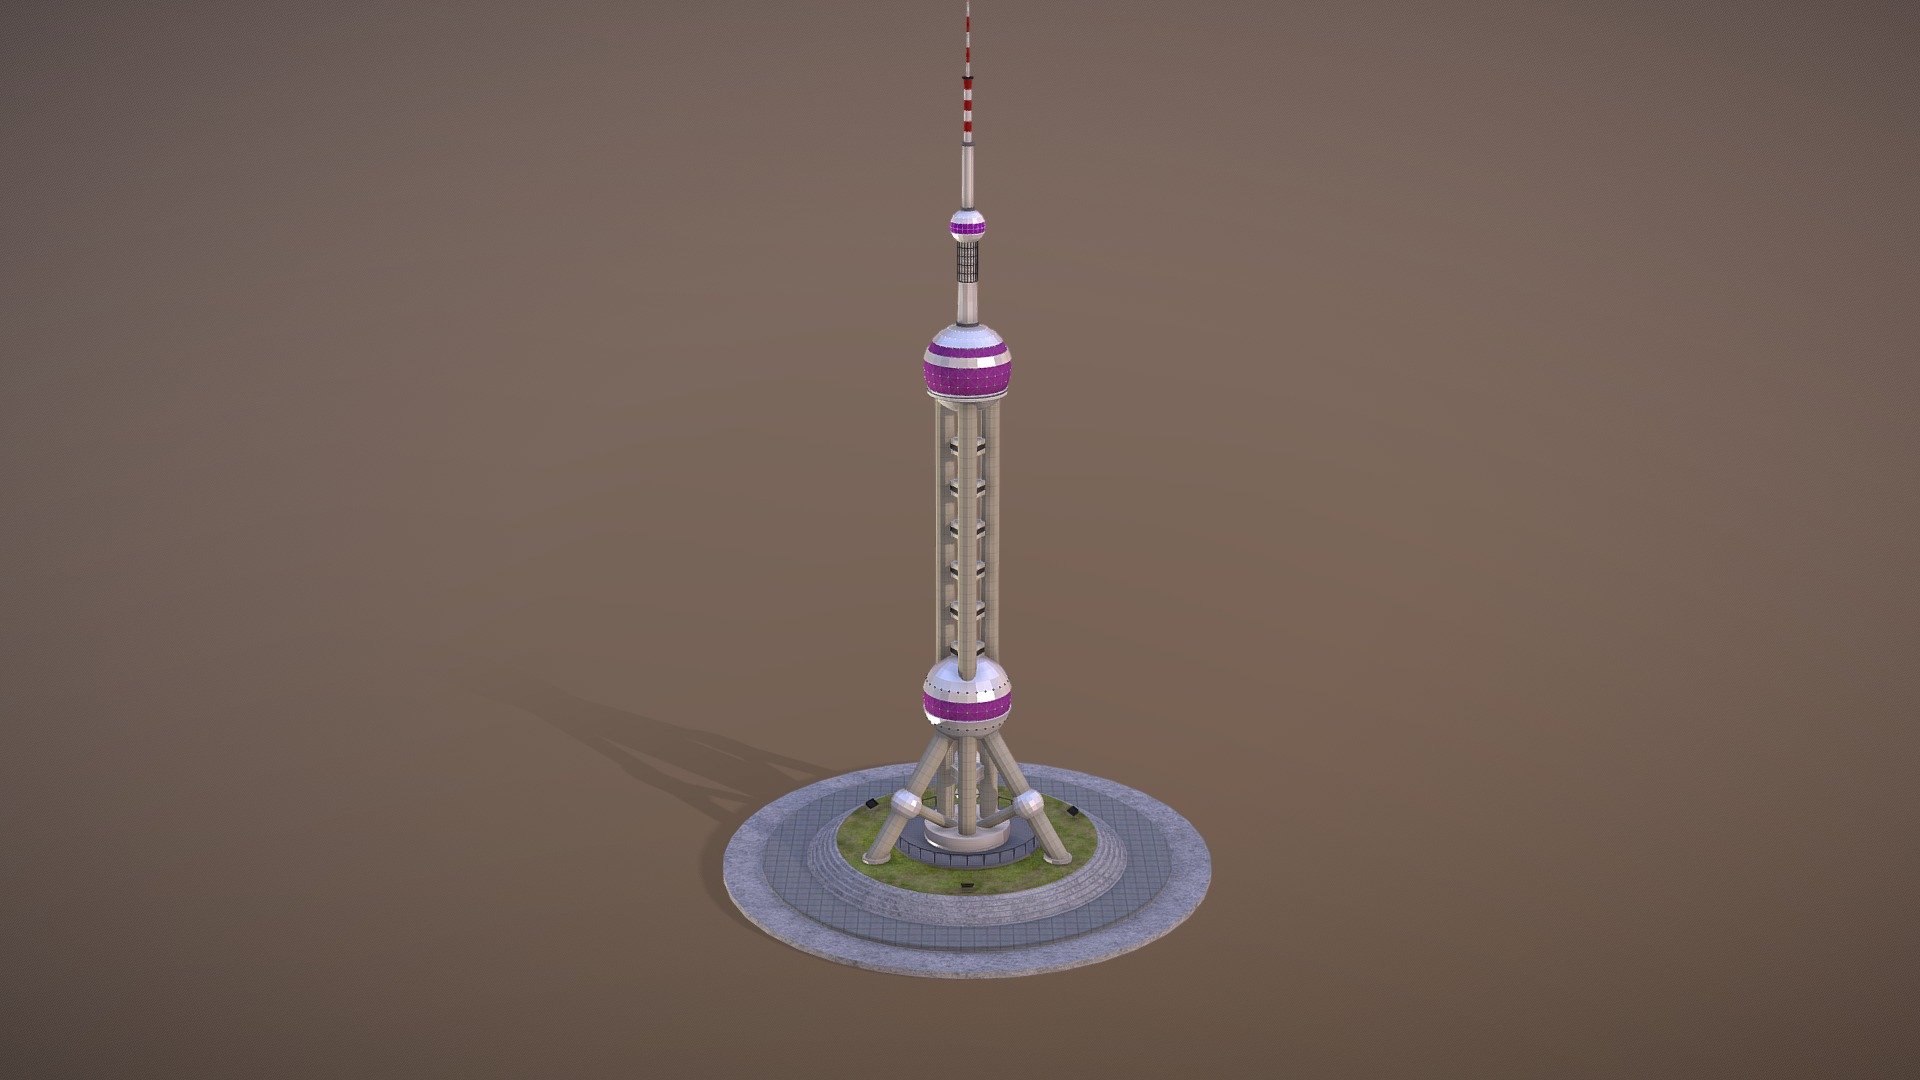 Famous Shanghai landmark, Oriental Pearl Tower.


Low poly version. Only 22.000 polygons! (14.000 vertex)
Made in 3D Studio Max 2018 + Vray. Also available in Max 2016 (Saved as downgrade version)
Available in multiple formats: Stl, Obj, Fbx, 3ds, Abc, C4d. (Exported formats may vary slightly depending on your software)
All objects named in english
UPDATE! New version uploaded on January 2020. 
Fixes:
Better mesh topology and texture
3DS Max and C4D version, now have &ldquo;Night Lighting